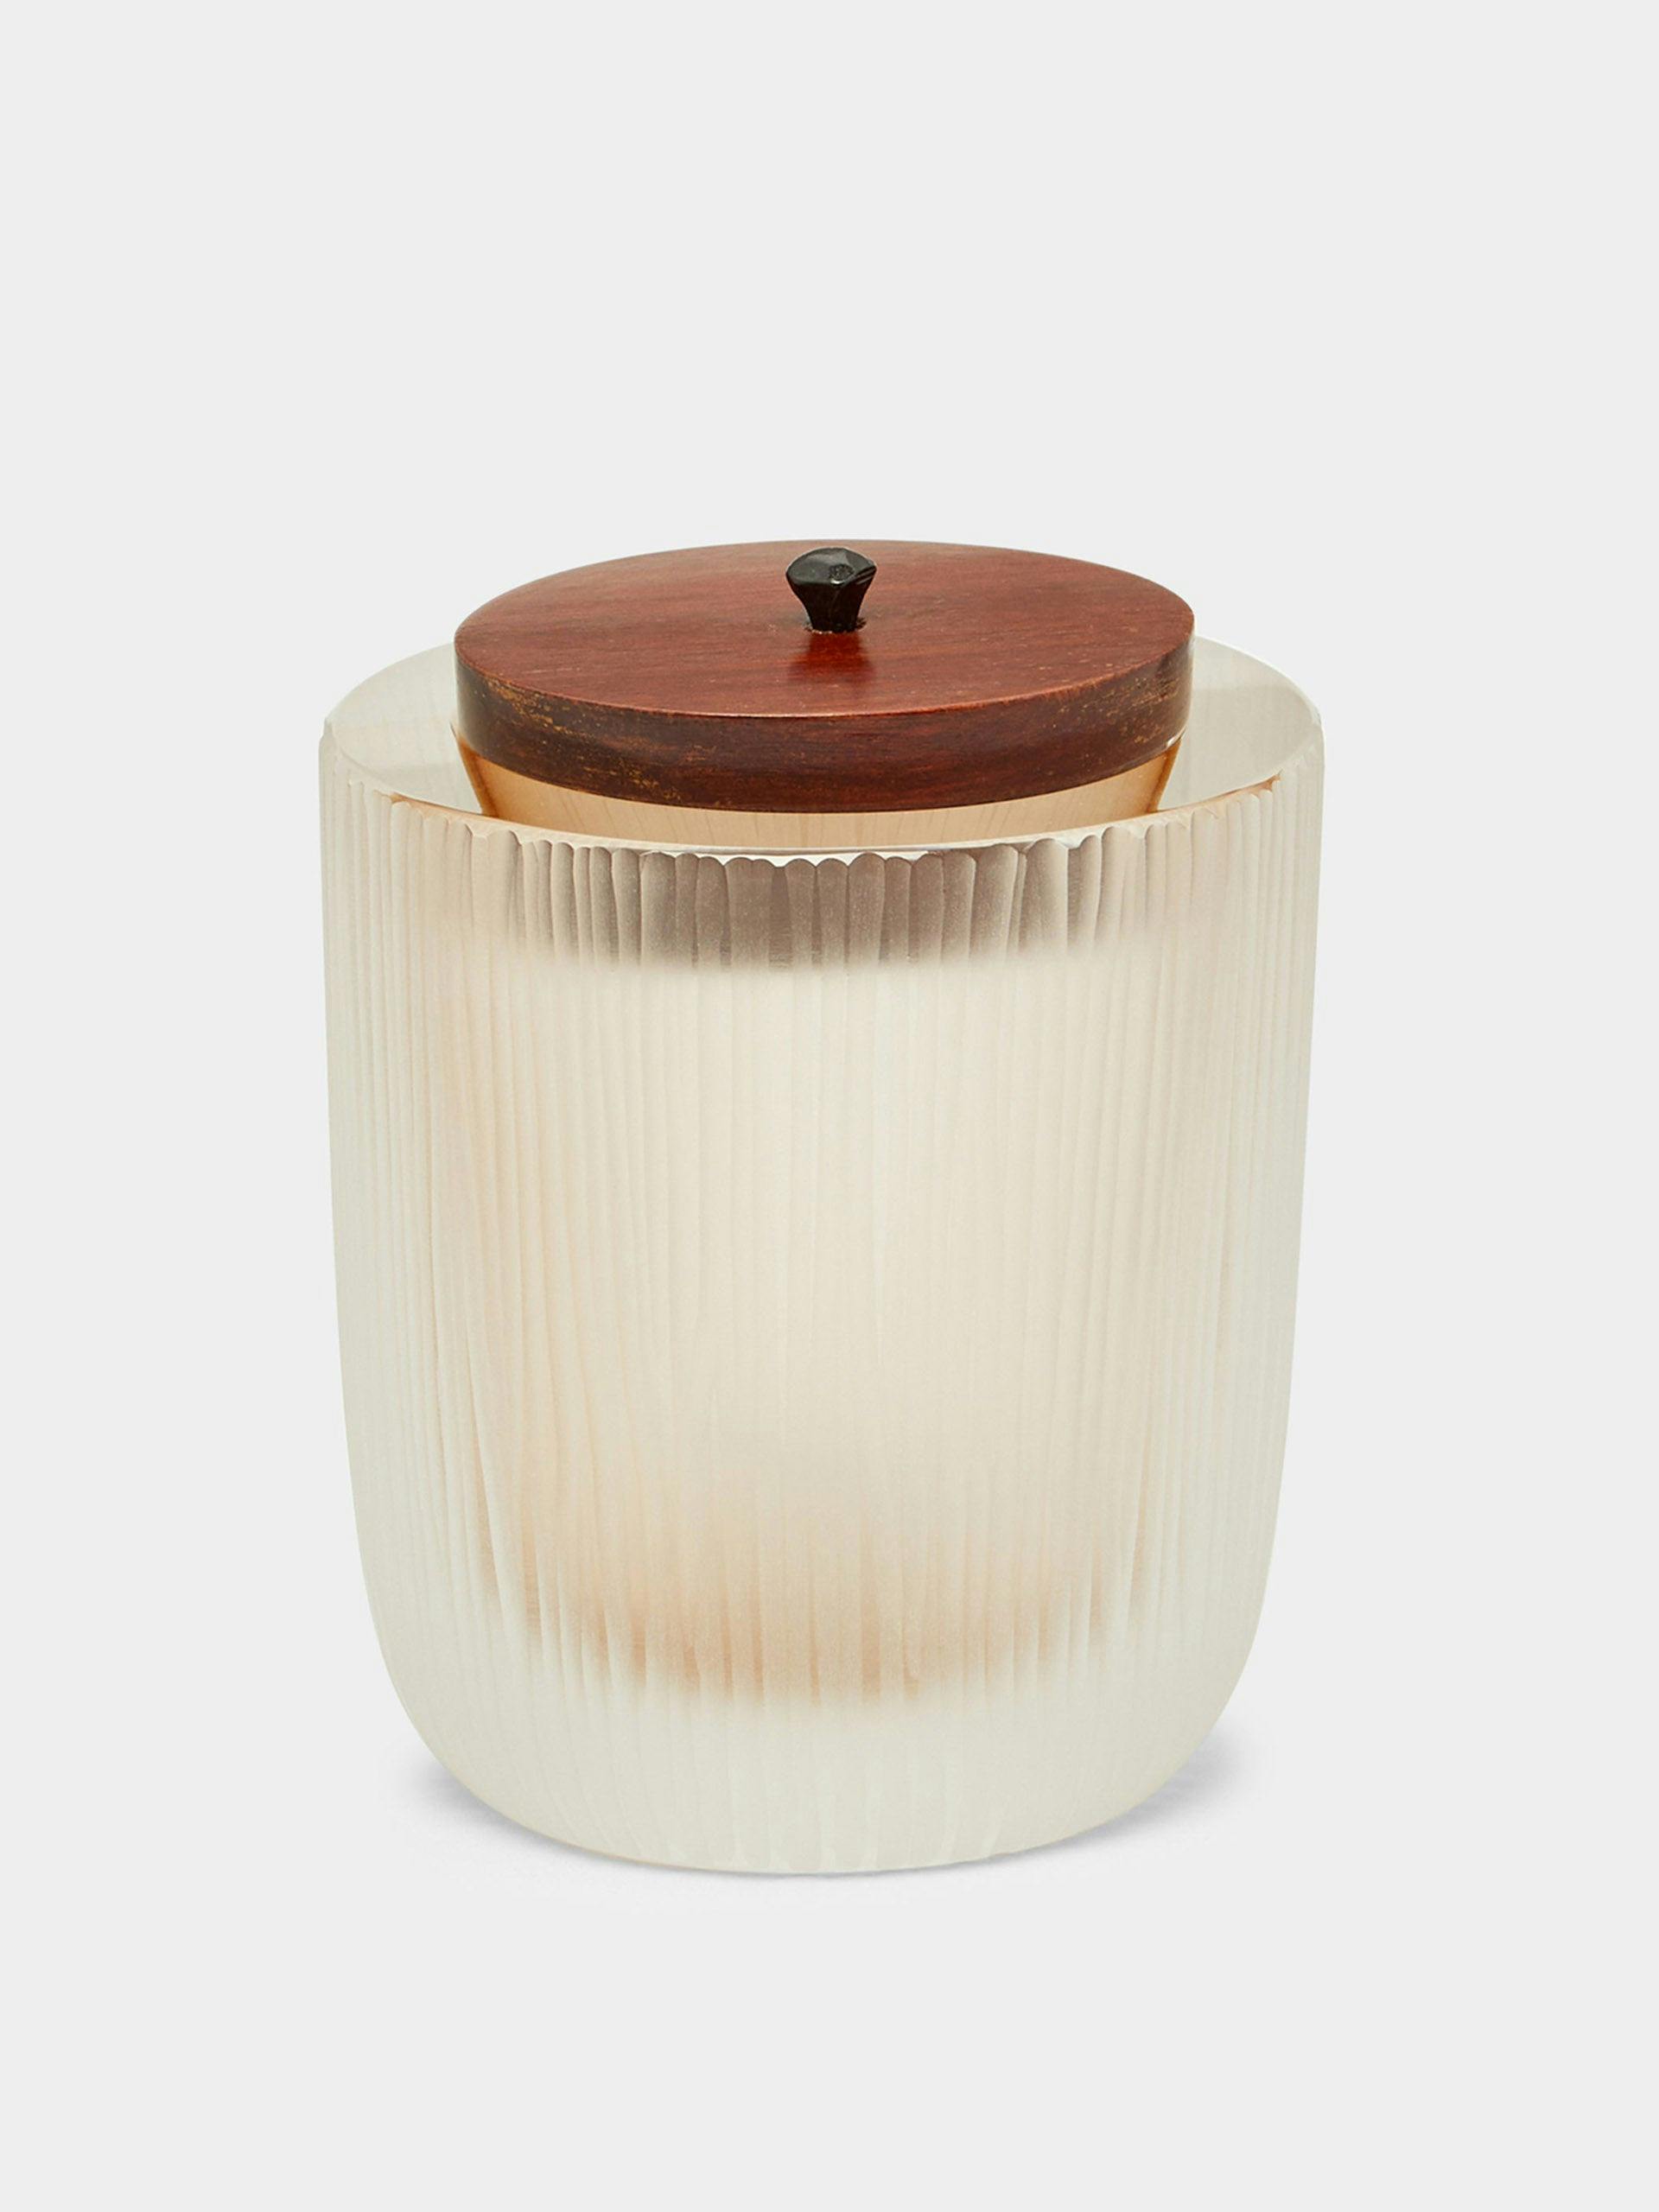 Kasa hand-blown glass container with wooden lid